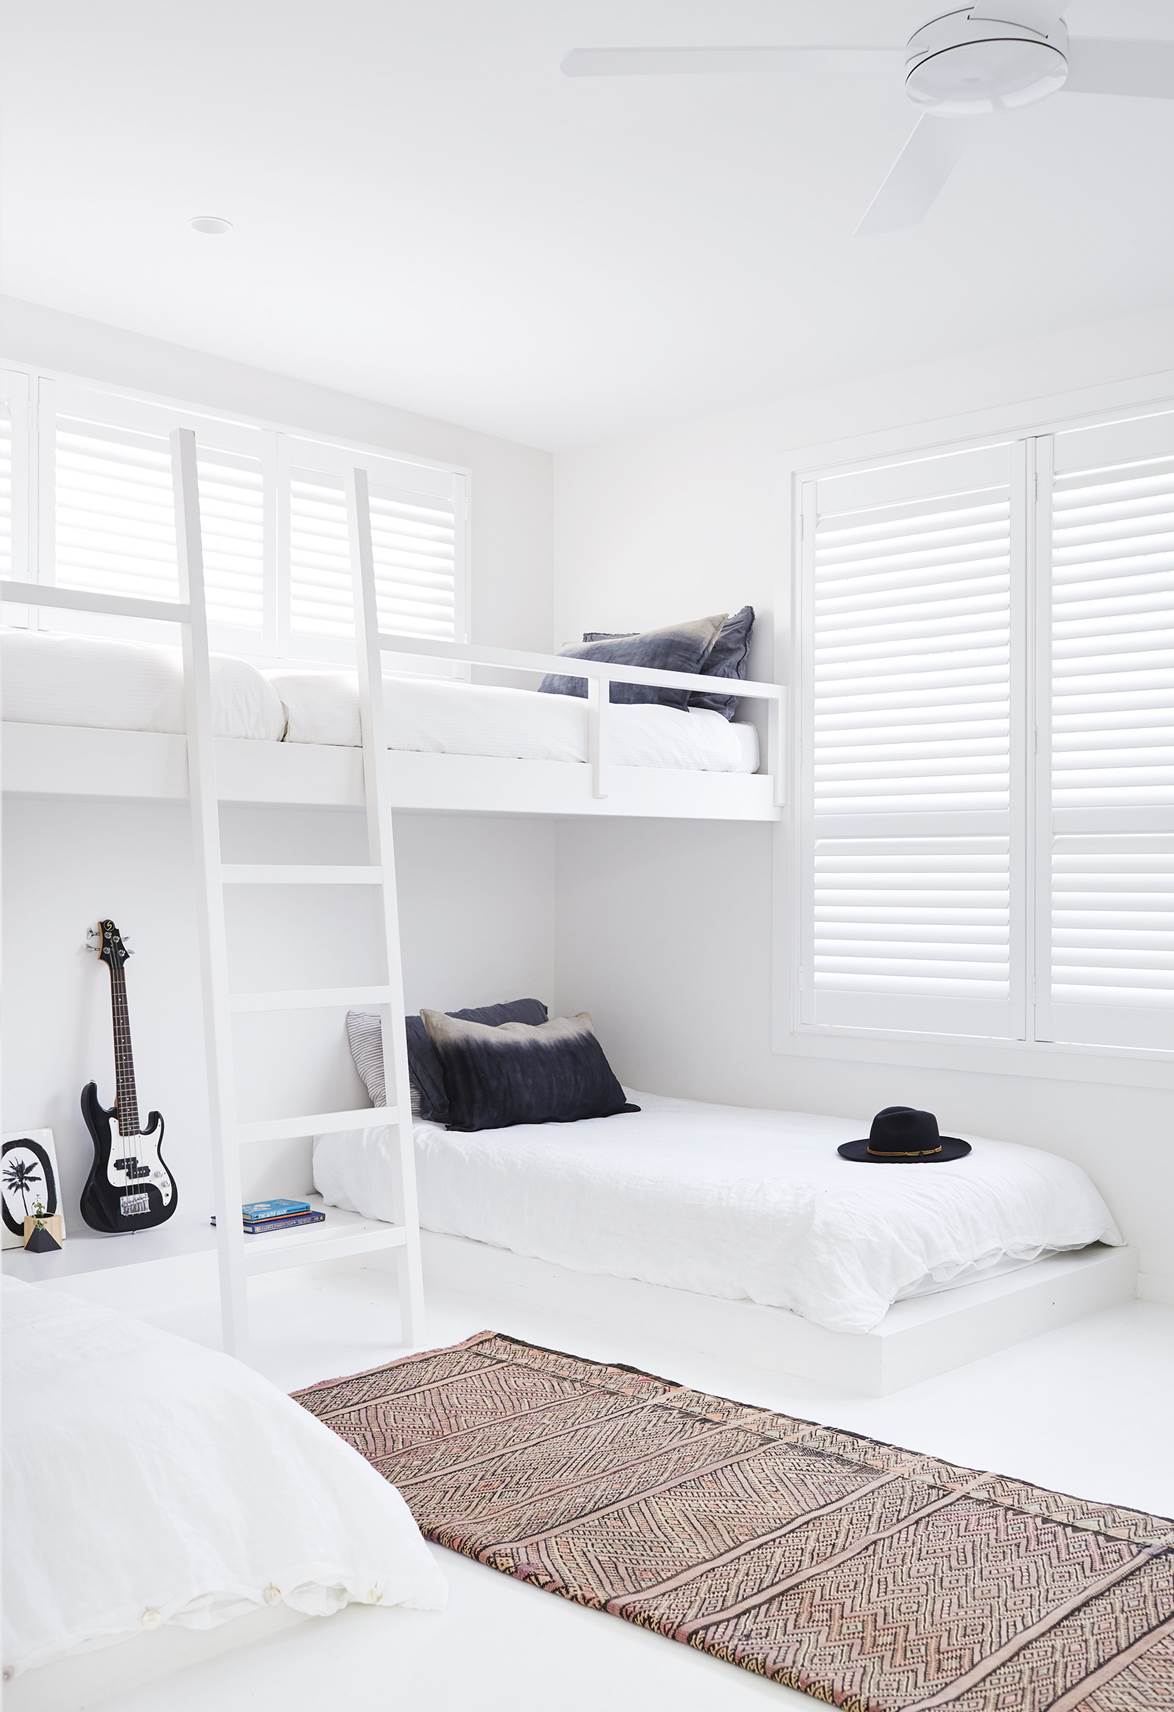 While an all-white palette for a kid's room might sound risky, this renovated Byron Bay home features stark white throughout the house. In the boy's room, a custom elevated bunk system was created to accommodate sleepovers and provide an extra play area.